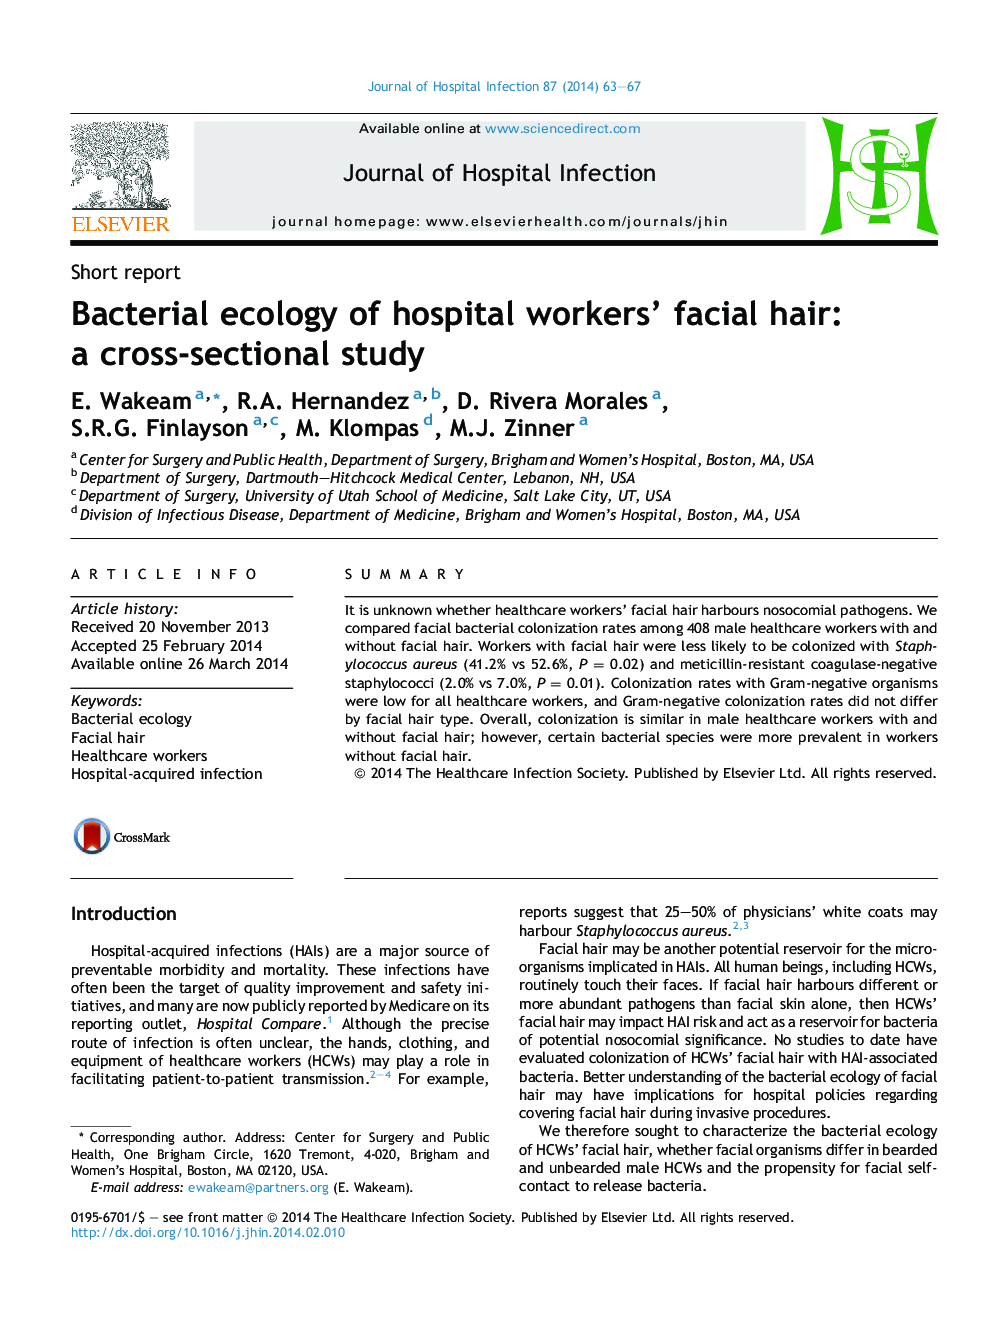 Bacterial ecology of hospital workers' facial hair: a cross-sectional study